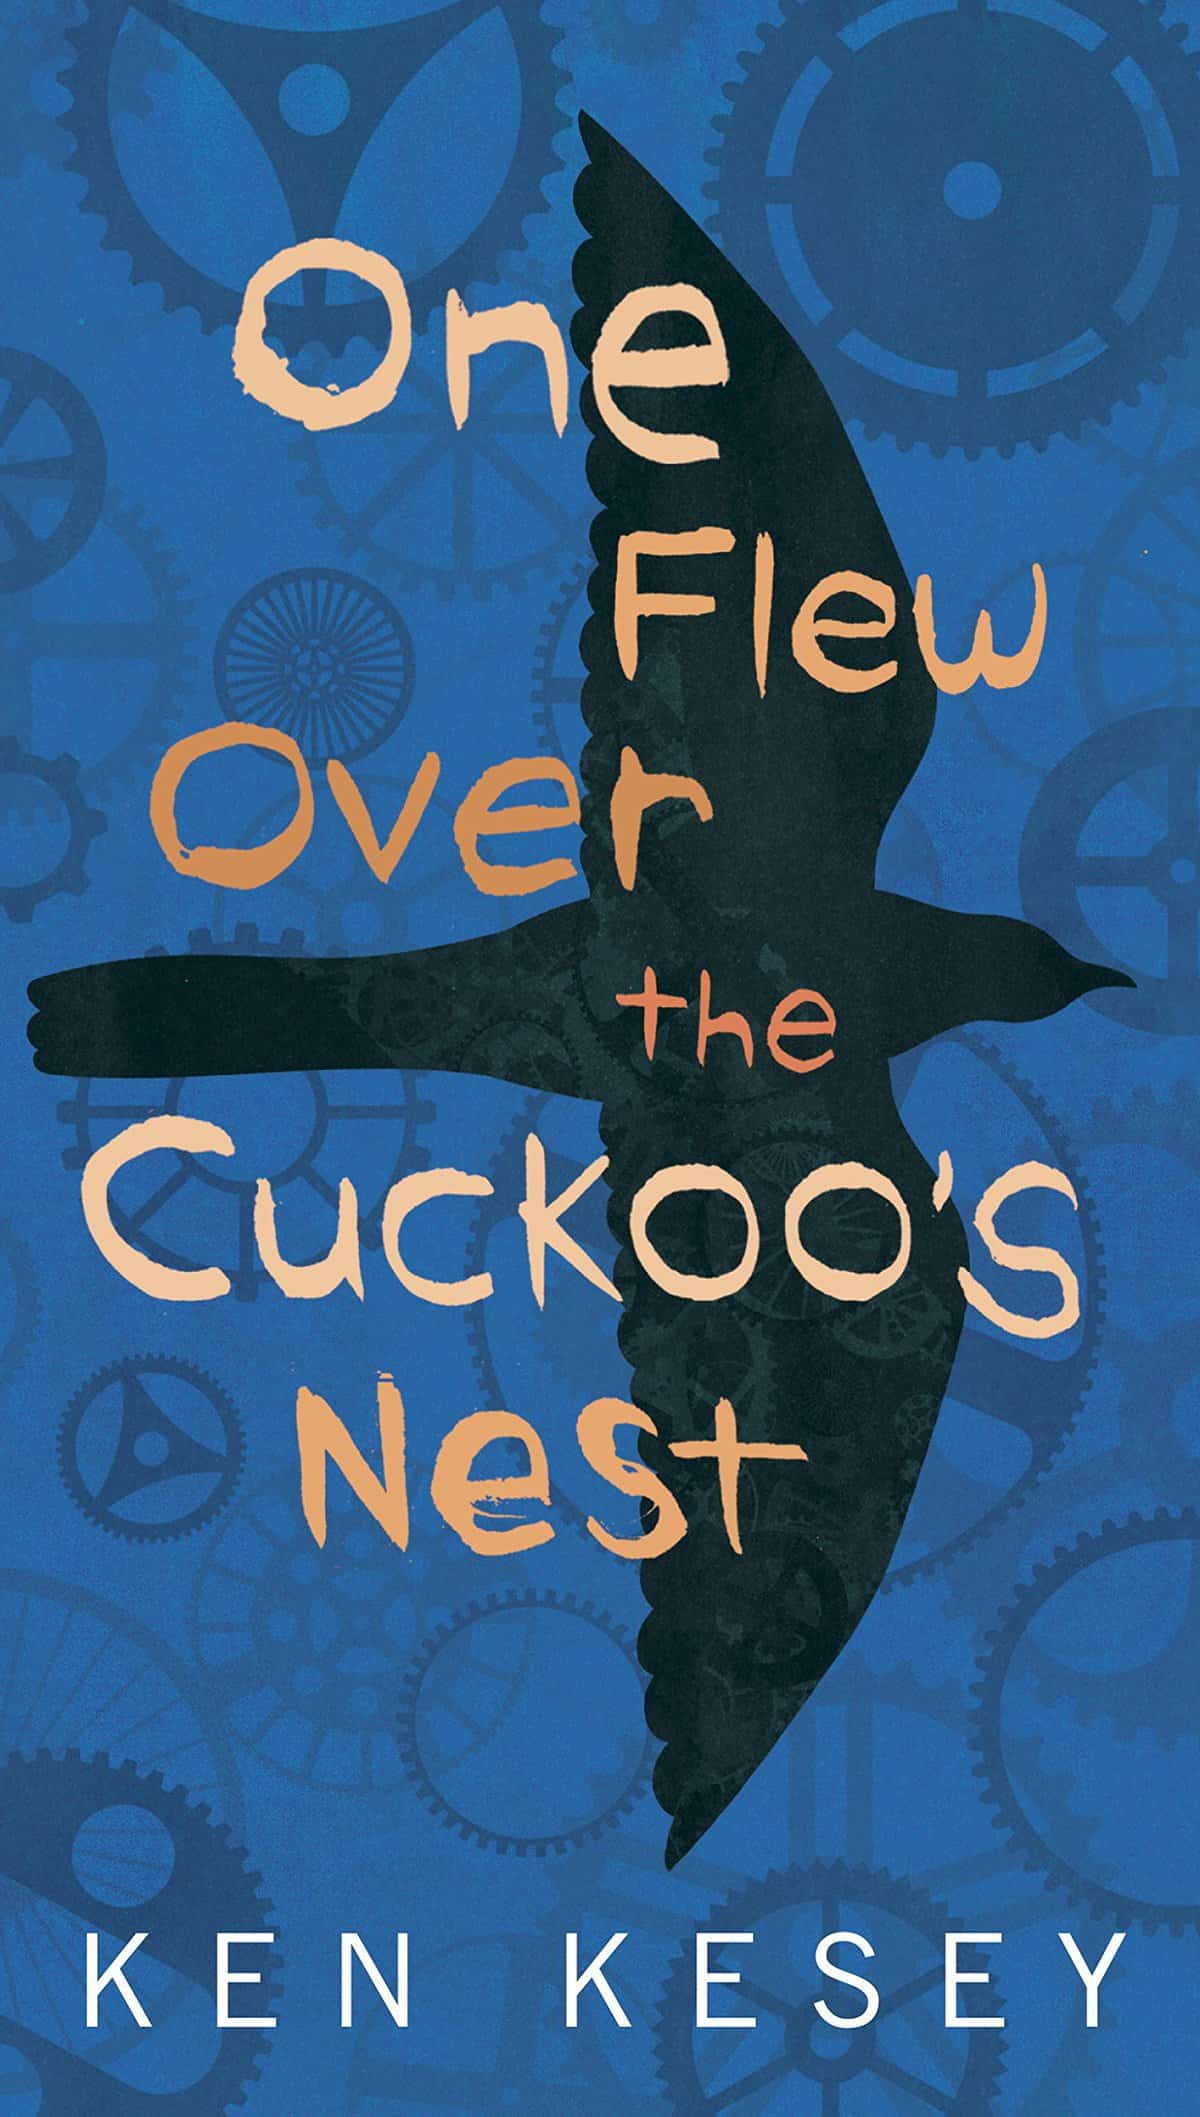 One Flew Over the Cuckoo’s Nest book